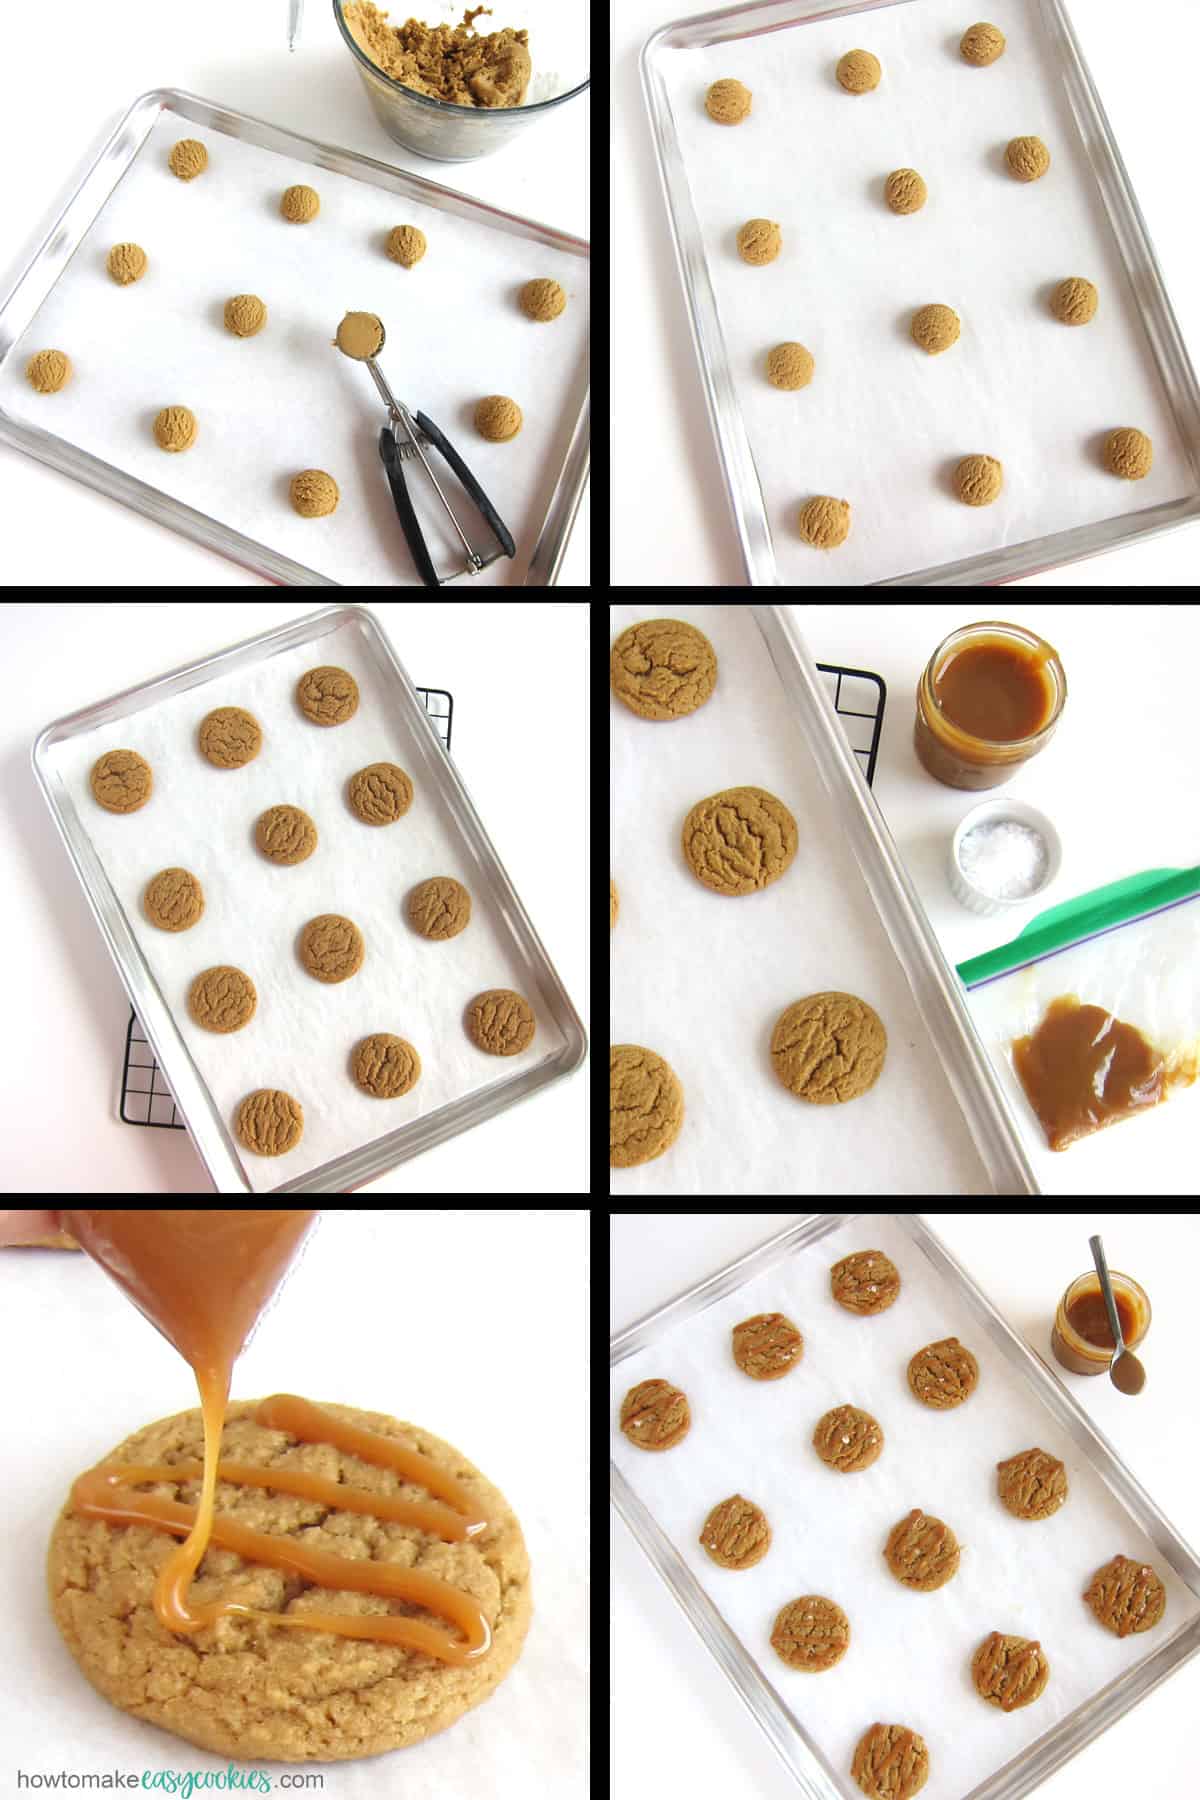 bake caramel cookies the drizzle with caramel sauce and sprinkle on salt flakes